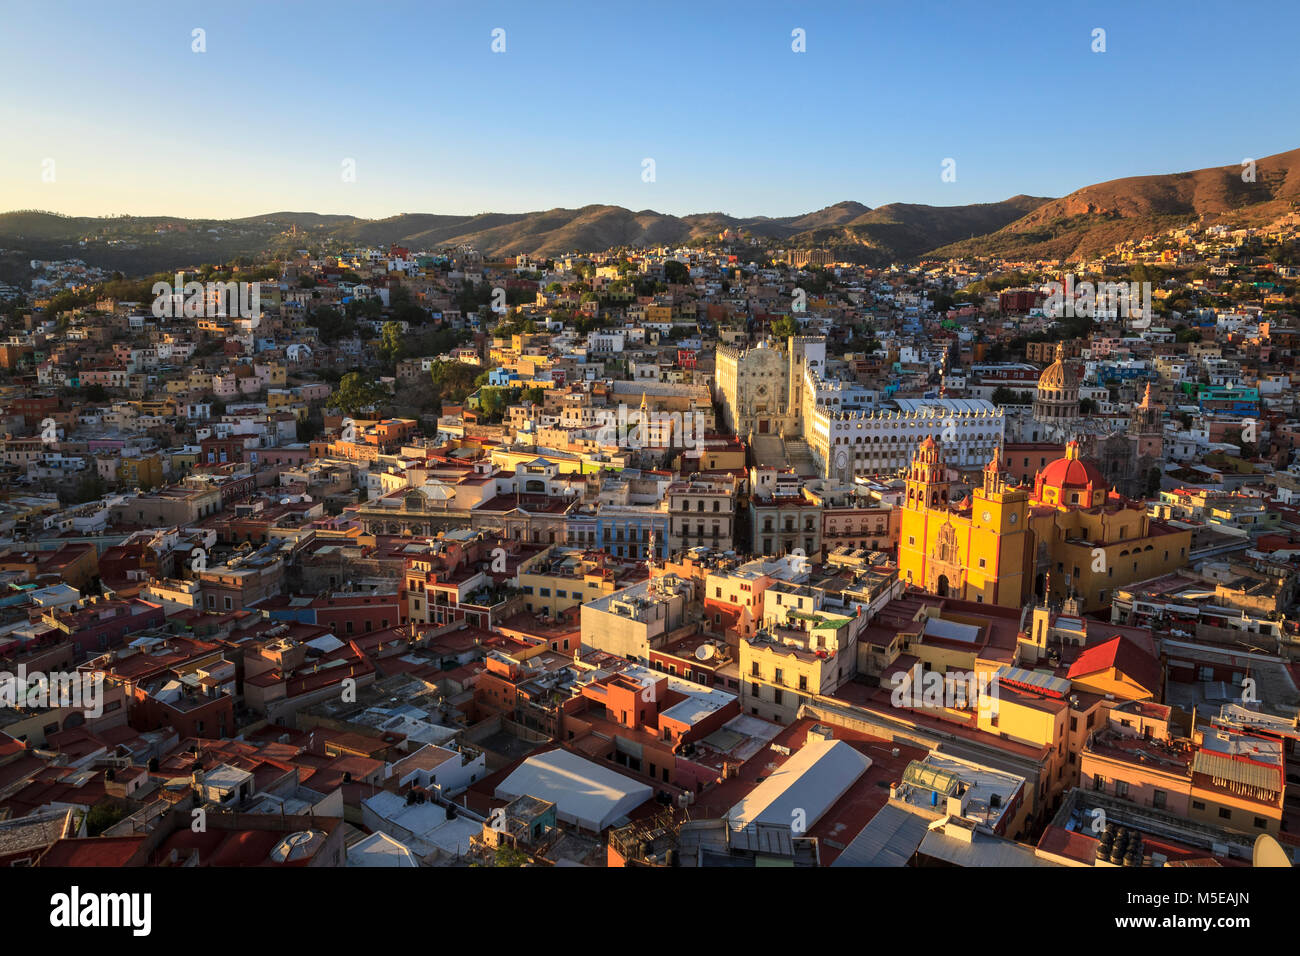 Horizontal bird's eye view of the colorful city of Guanajuato in central Mexico, UNESCO World Heritage Site since 1988. Stock Photo